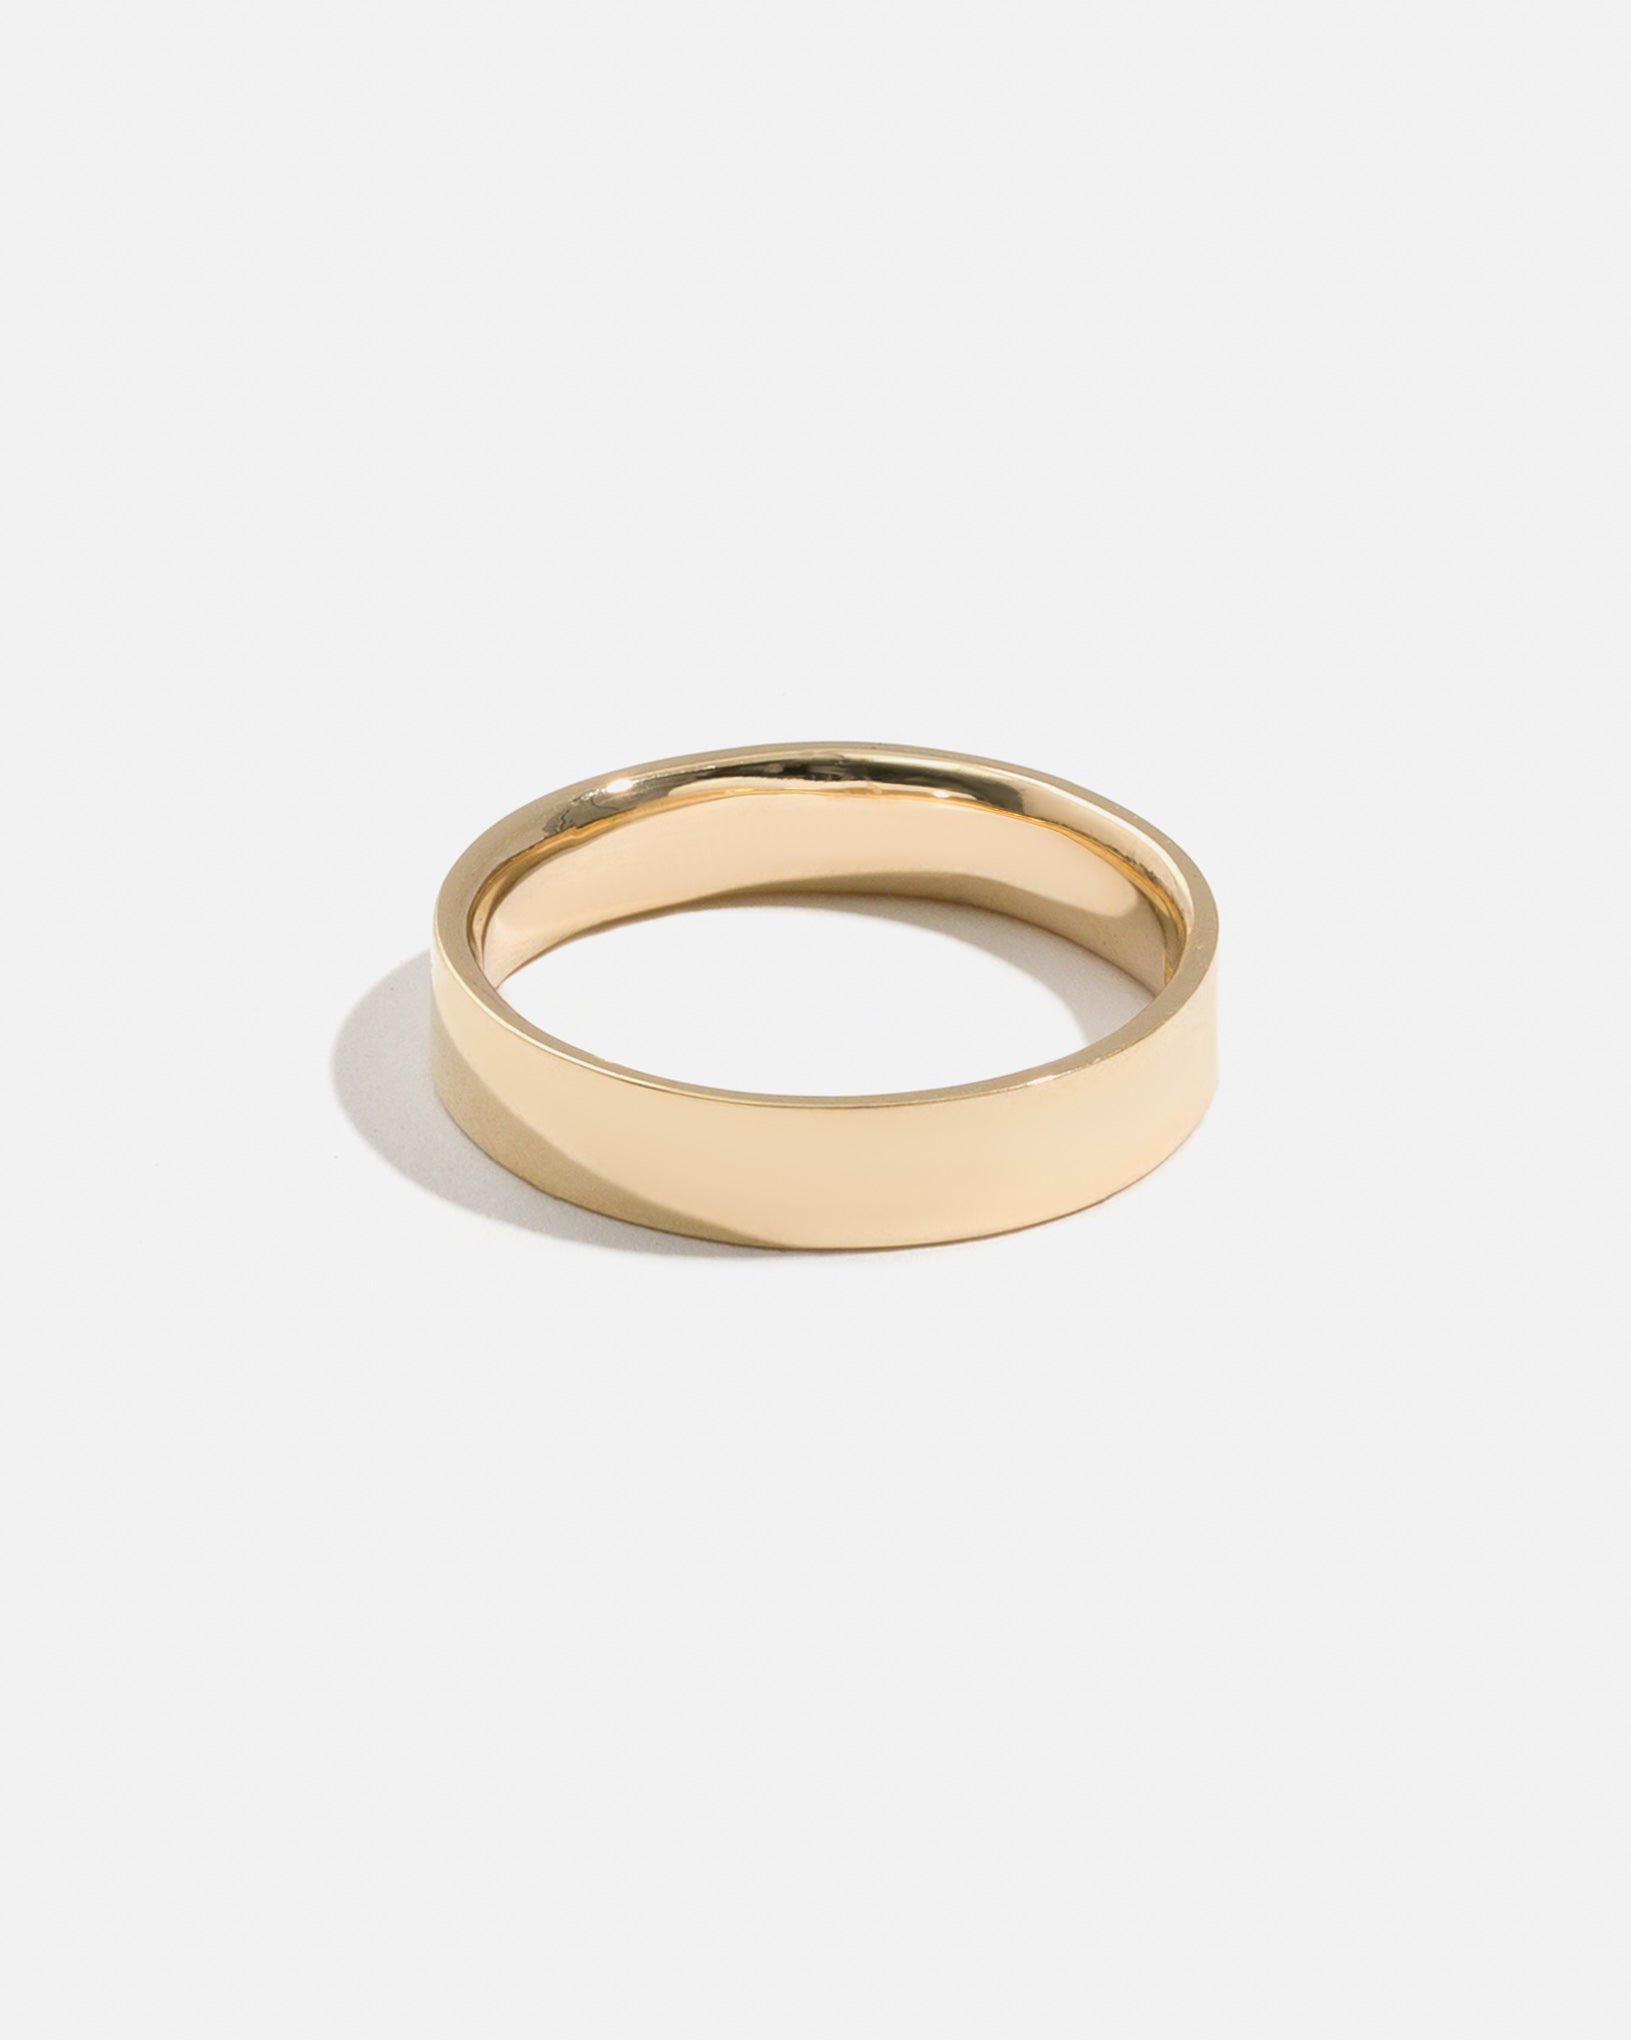 Square Band in 14k Gold 4mm